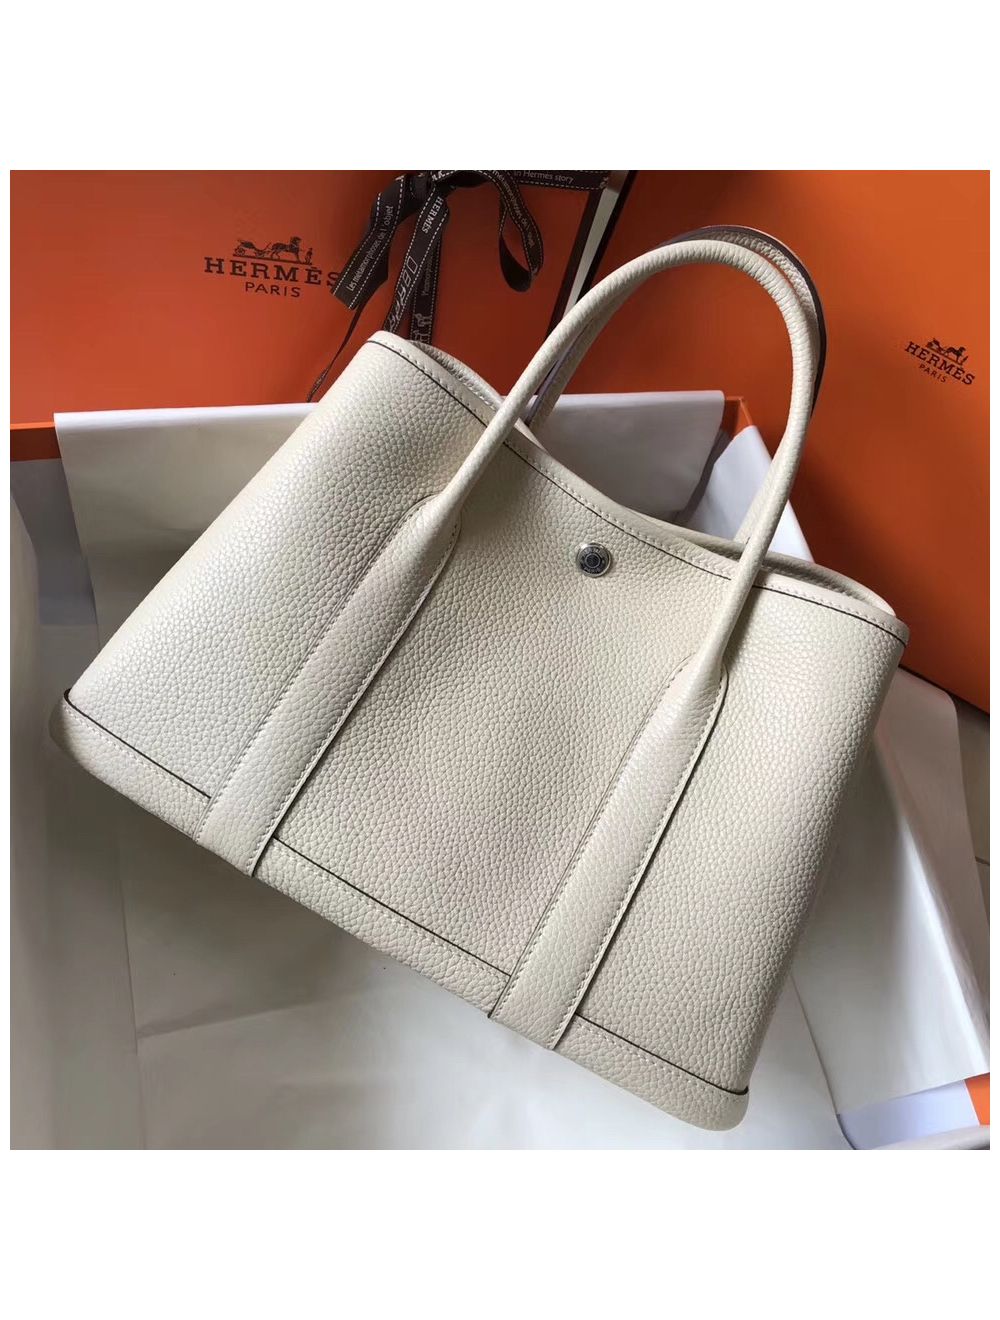 Replica Hermes Garden Party 36 Bag In White Clemence Leather